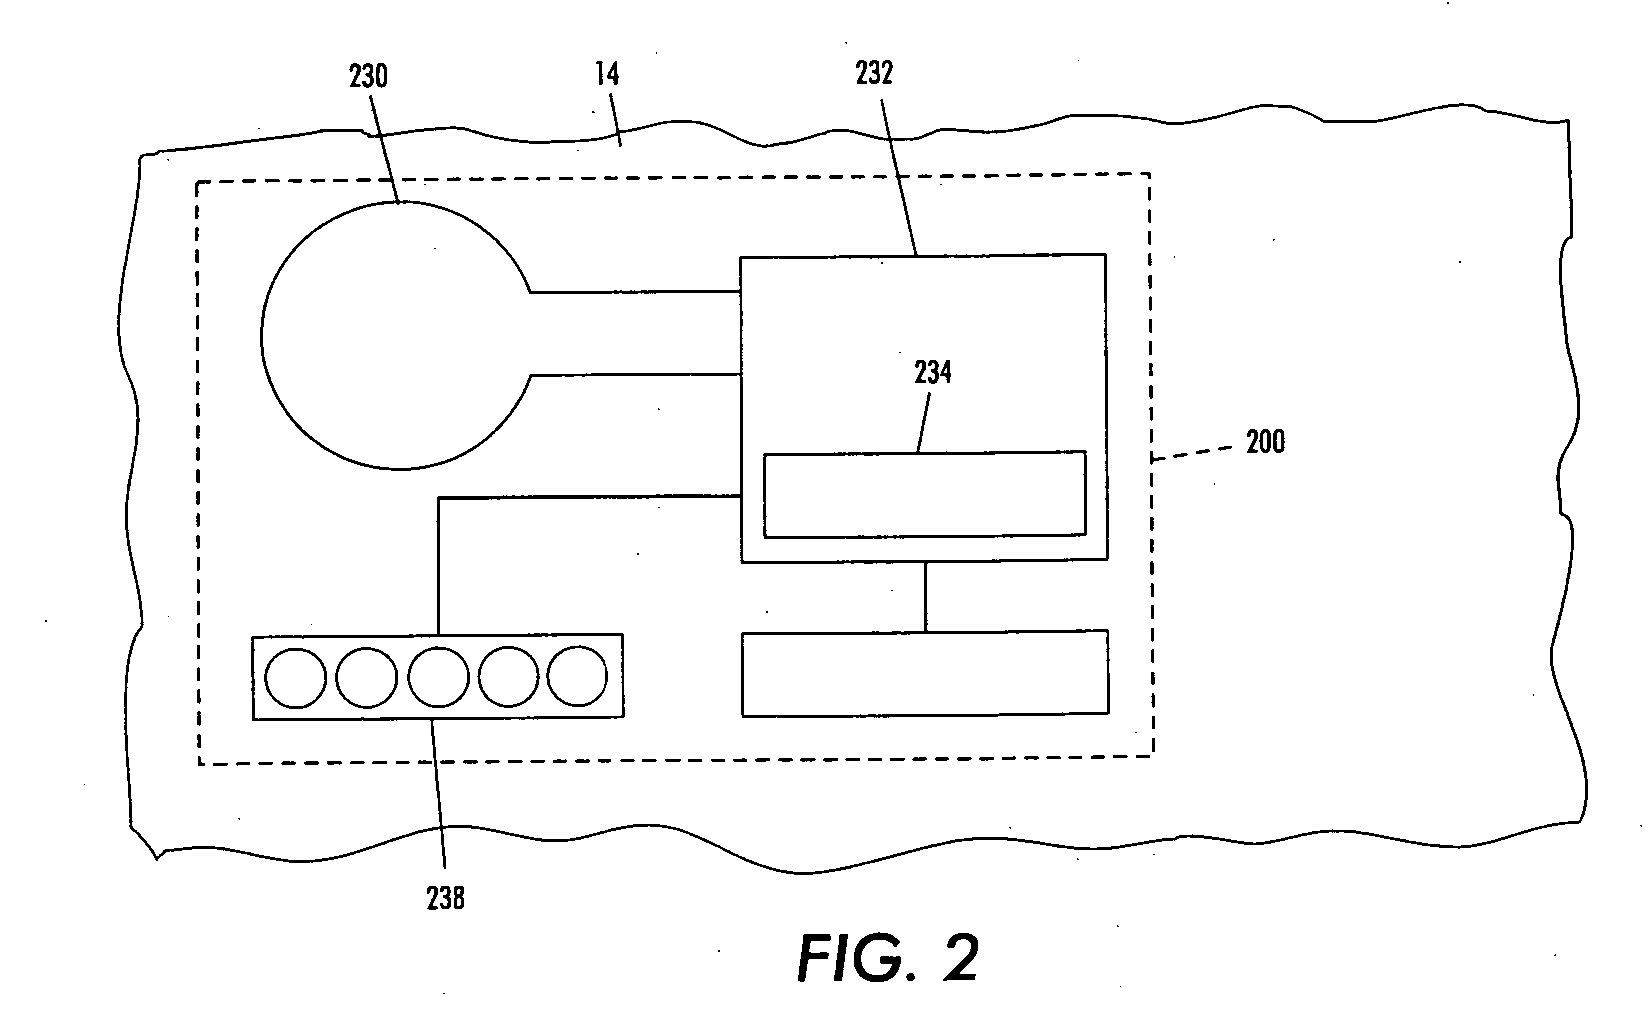 Systems and methods for monitoring replaceable units